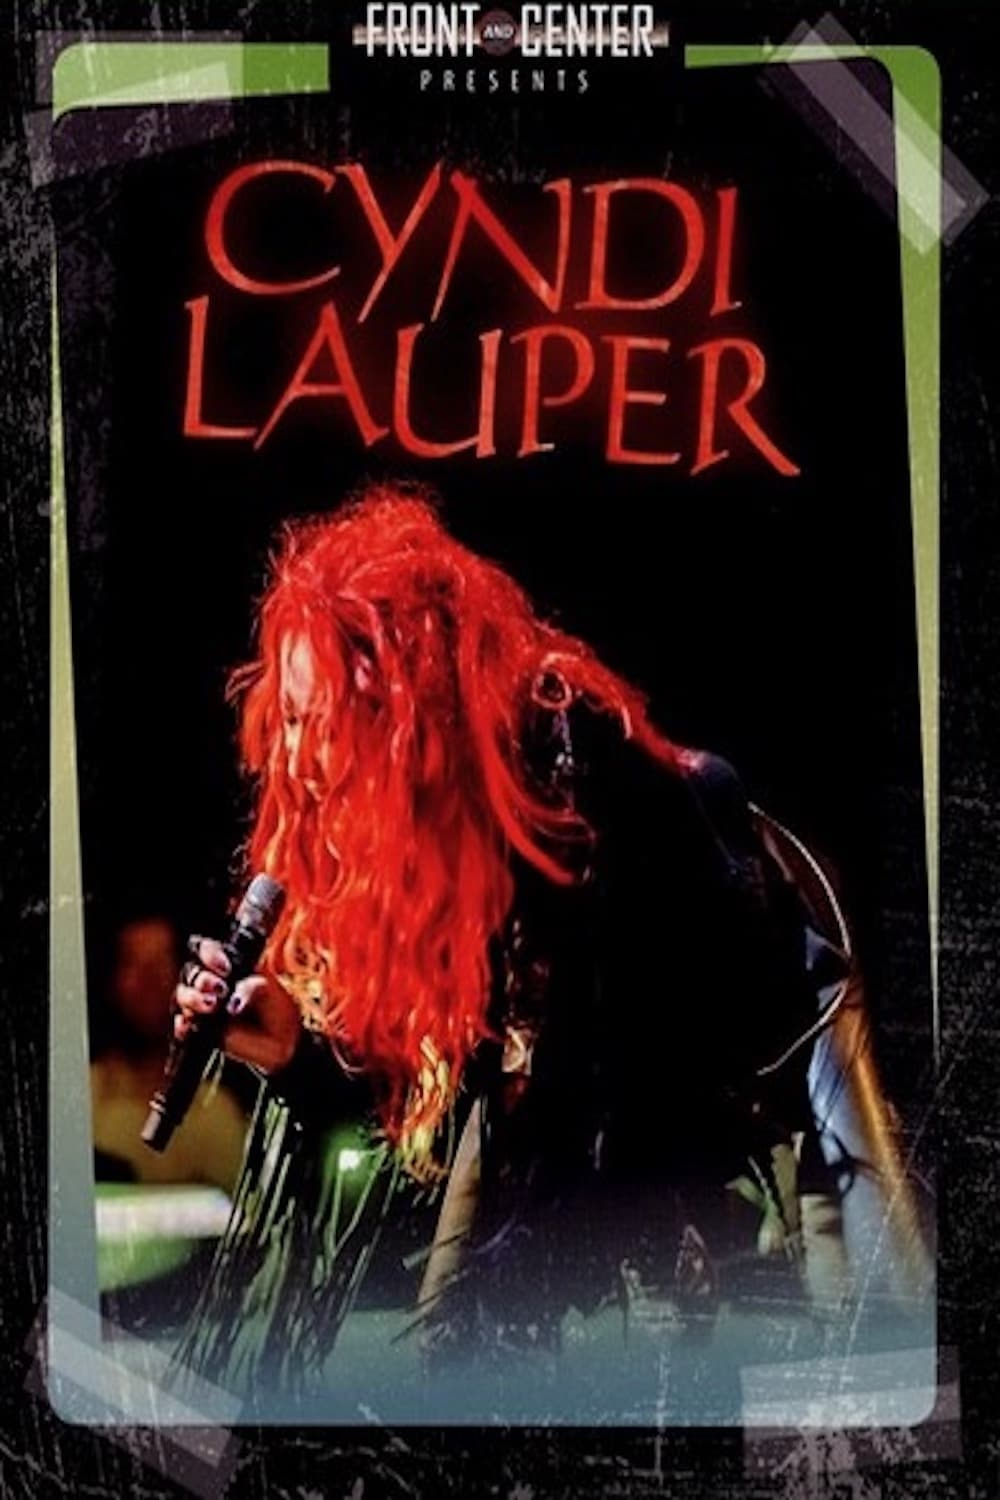 Cyndi Lauper - Front And Center Live